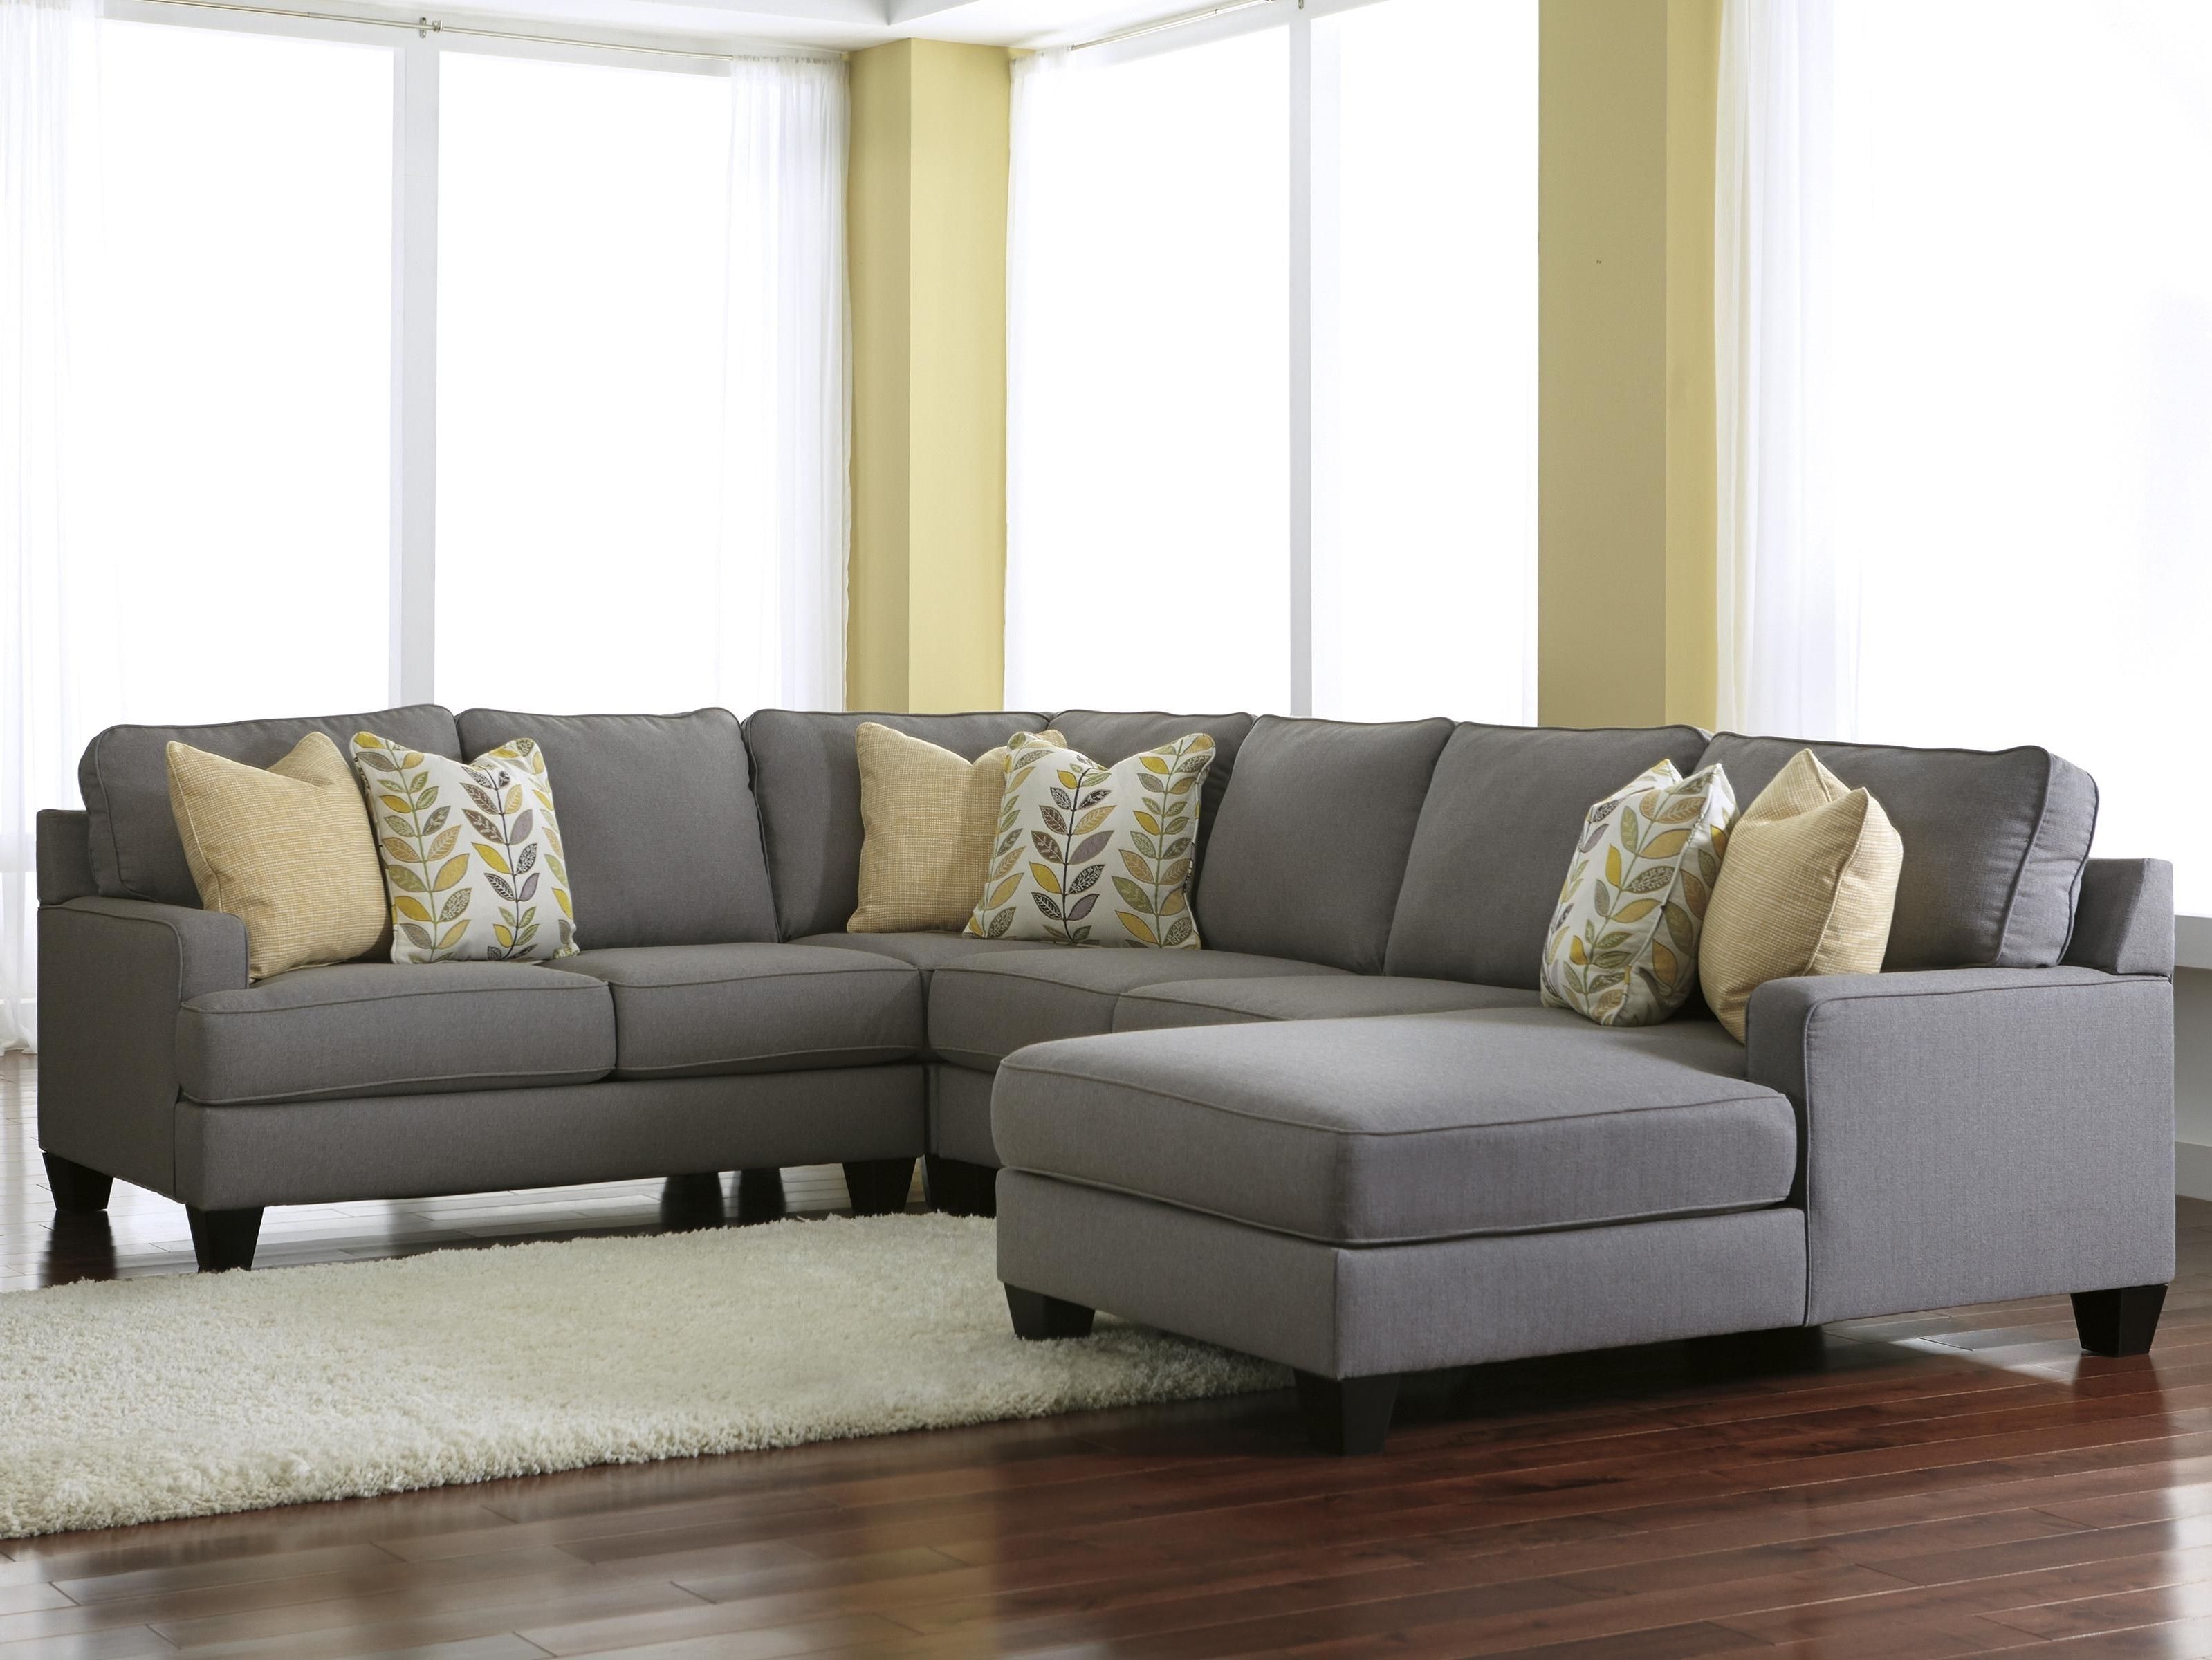 Modern 4 Piece Sectional Sofa With Left Chaise & Reversible Seat Intended For Best And Newest Eau Claire Wi Sectional Sofas (View 1 of 20)